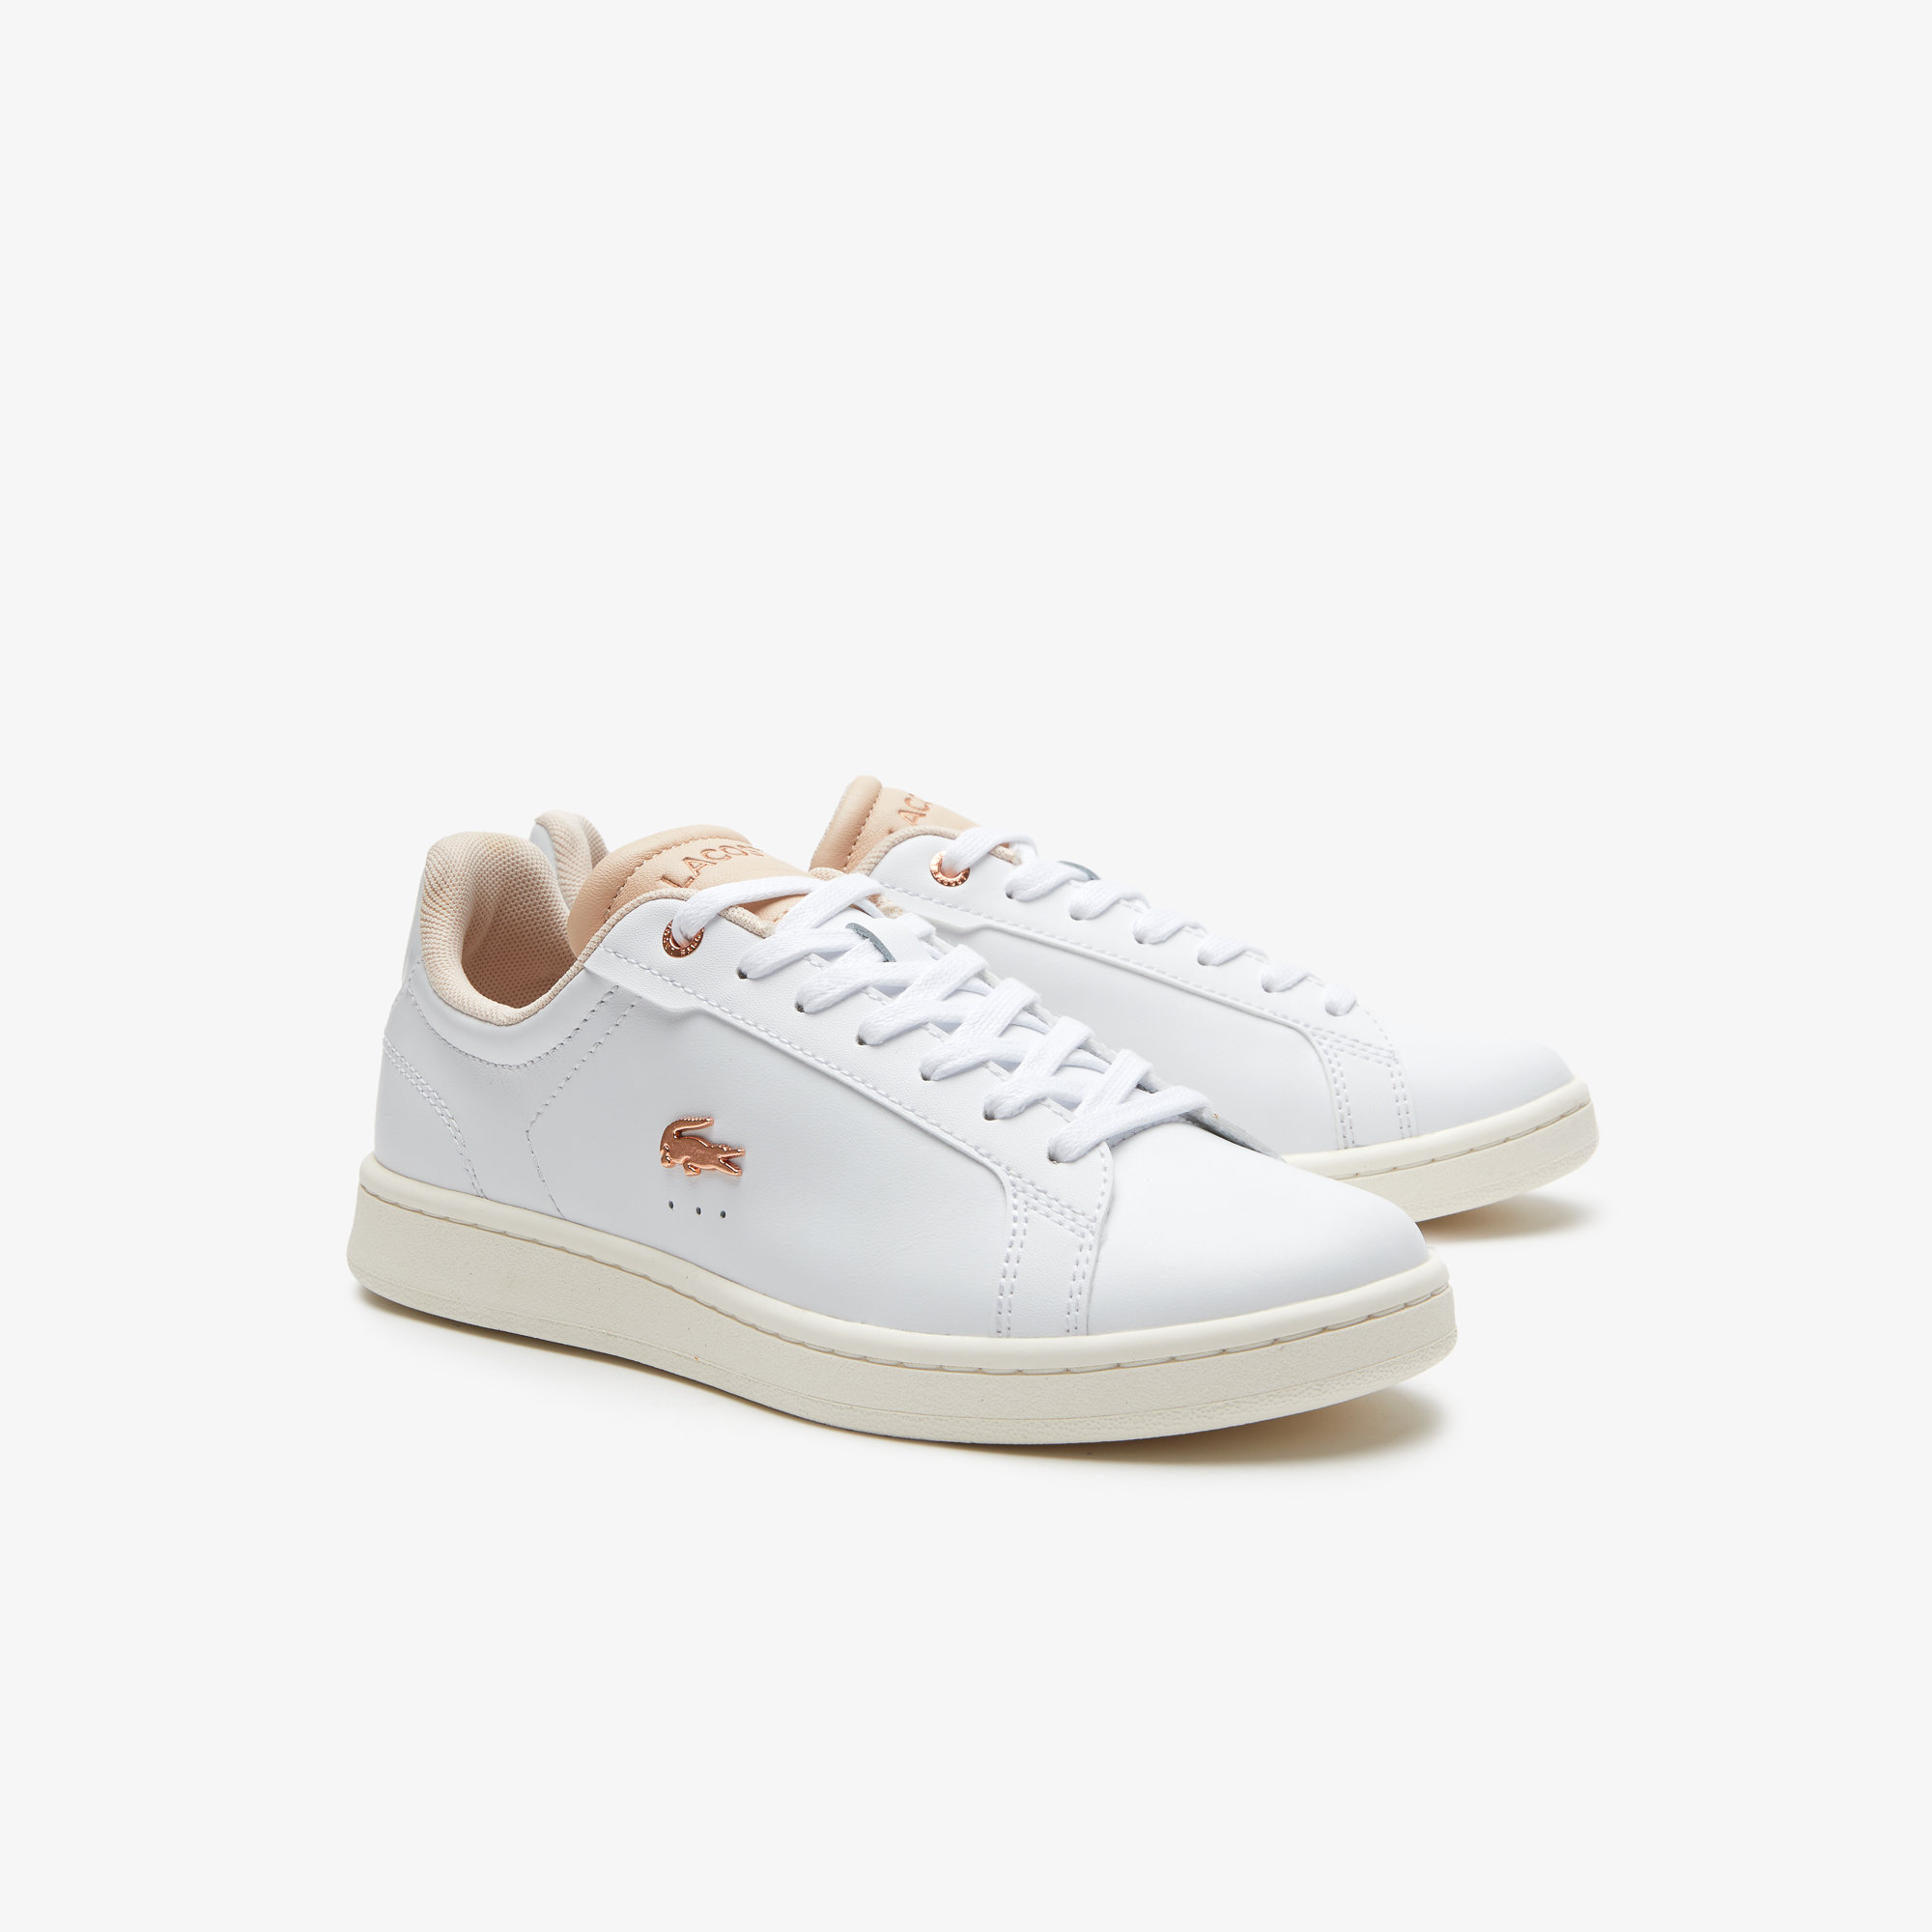 Women's Lacoste Carnaby Pro Leather Trainers | LACOSTE